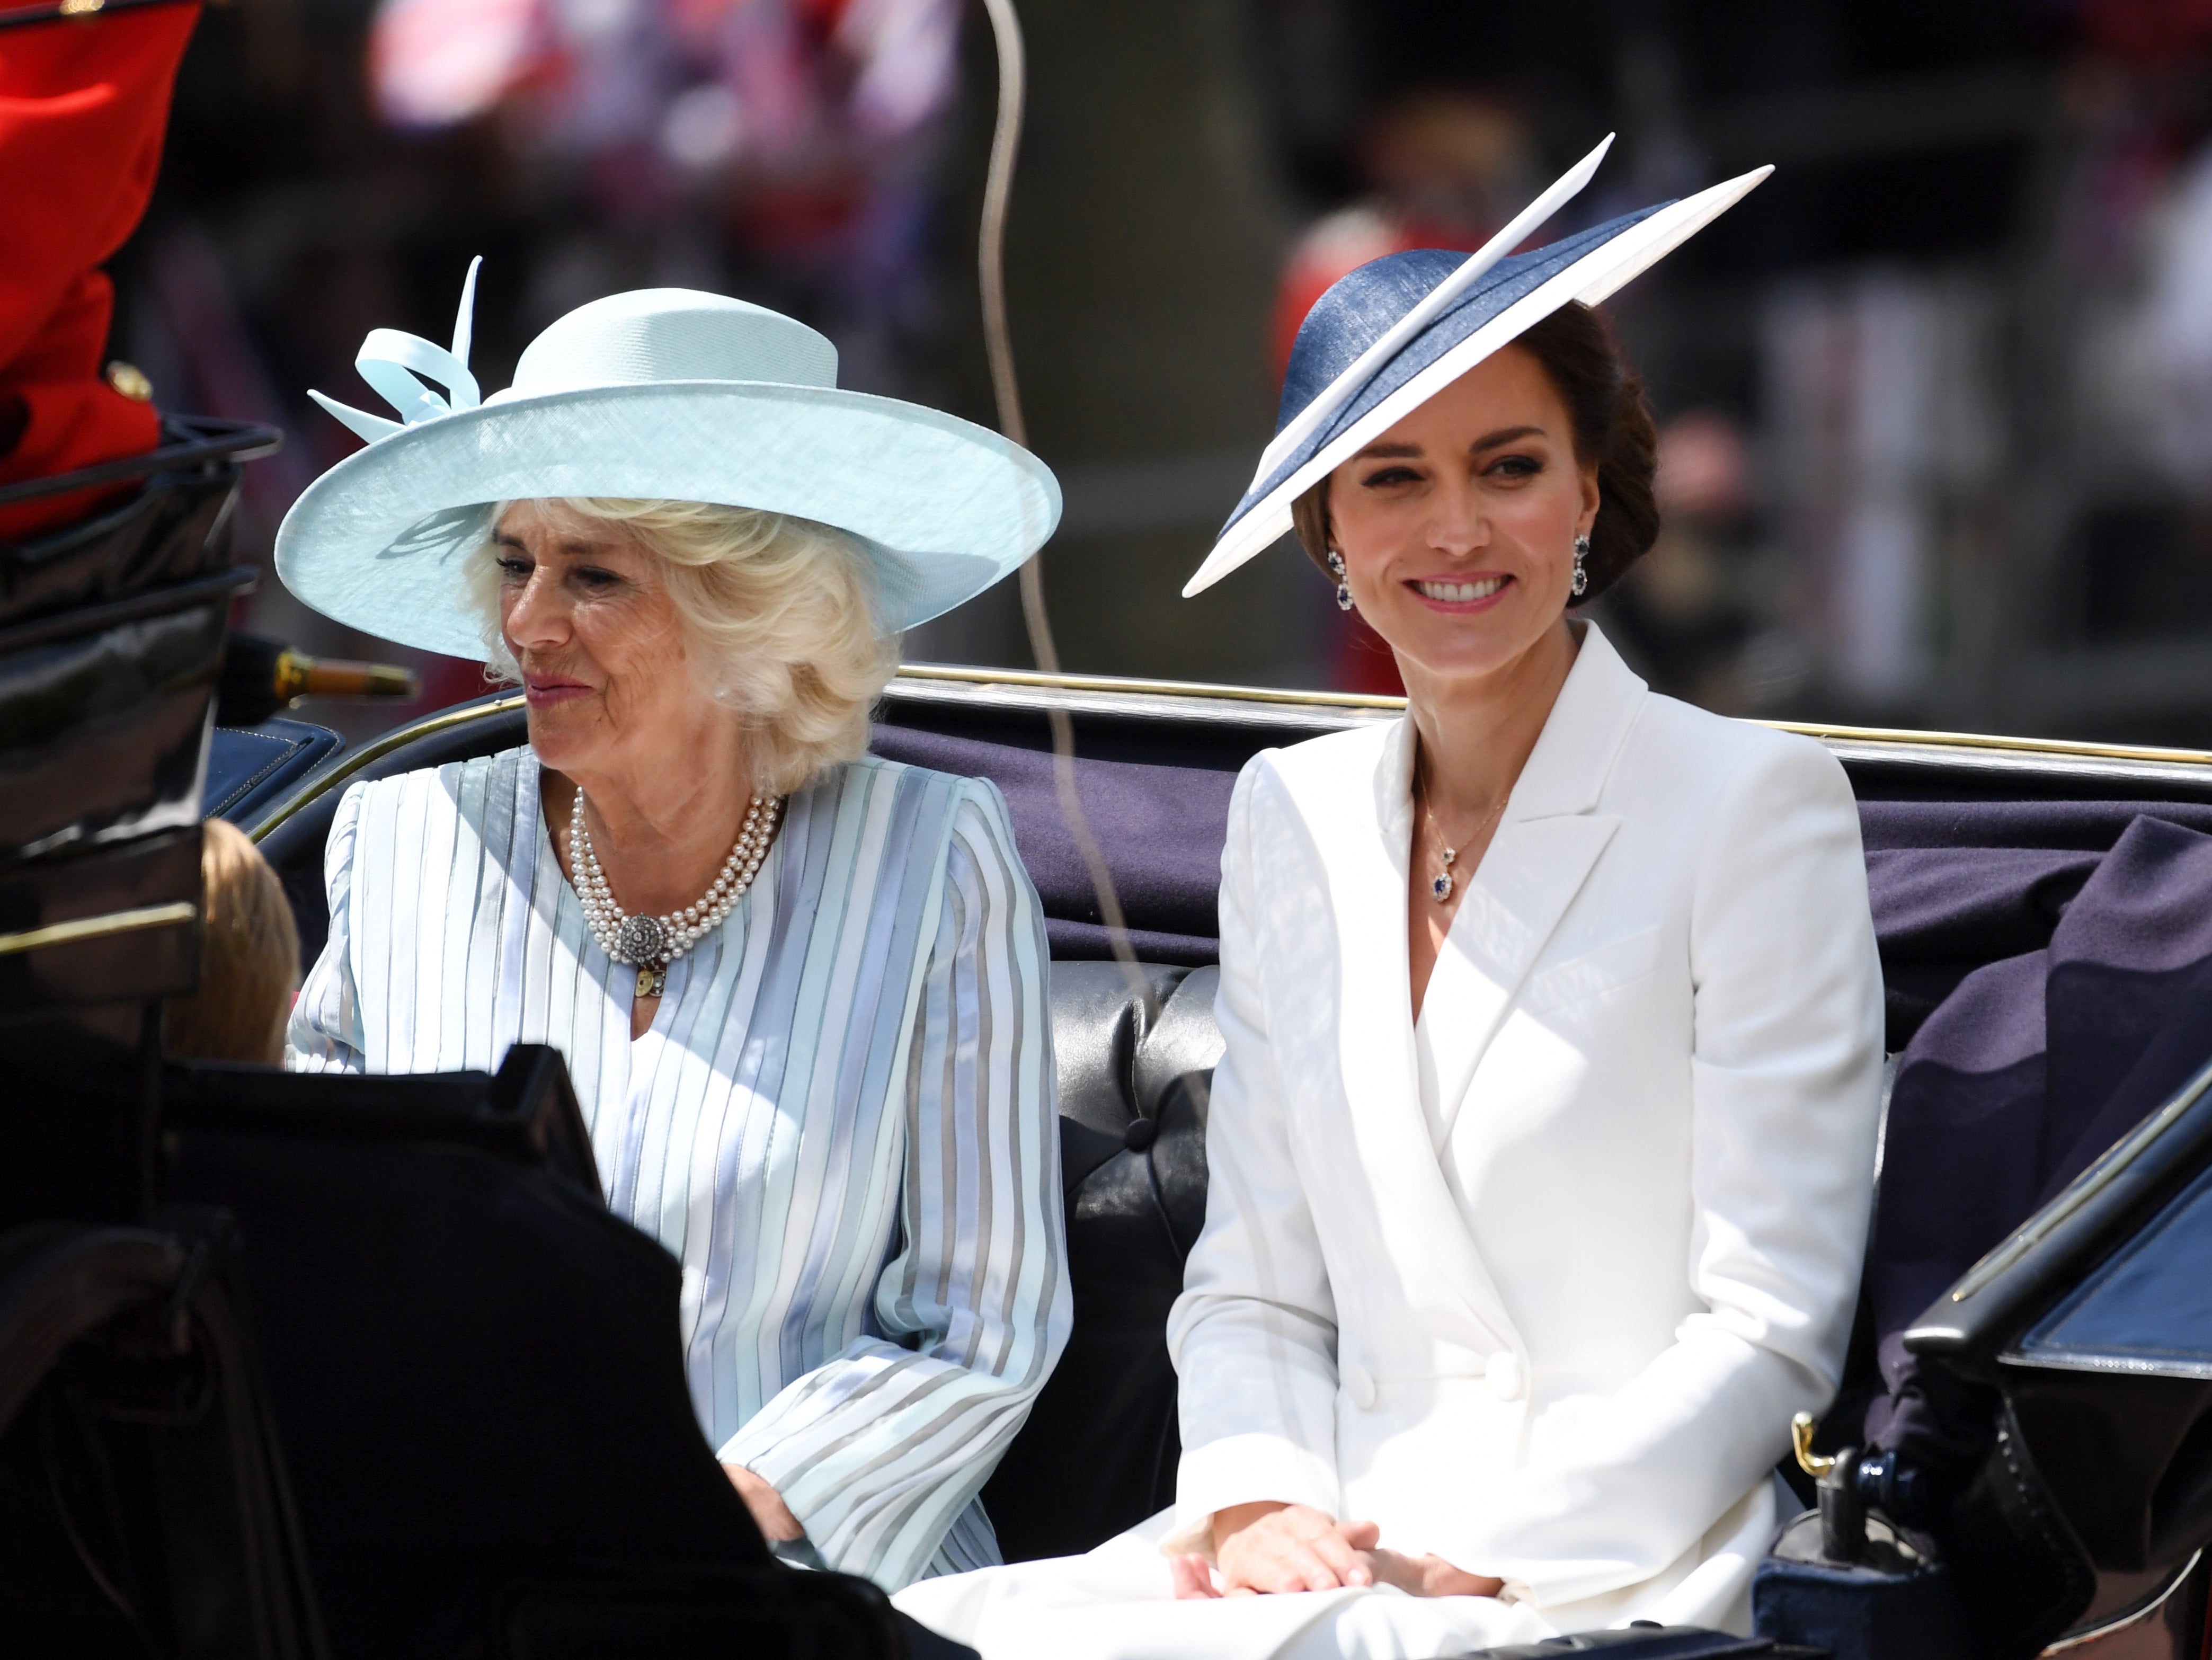 Camilla, Duchess of Cornwall, and Catherine, Duchess of Cambridge during the Trooping the Colour parade